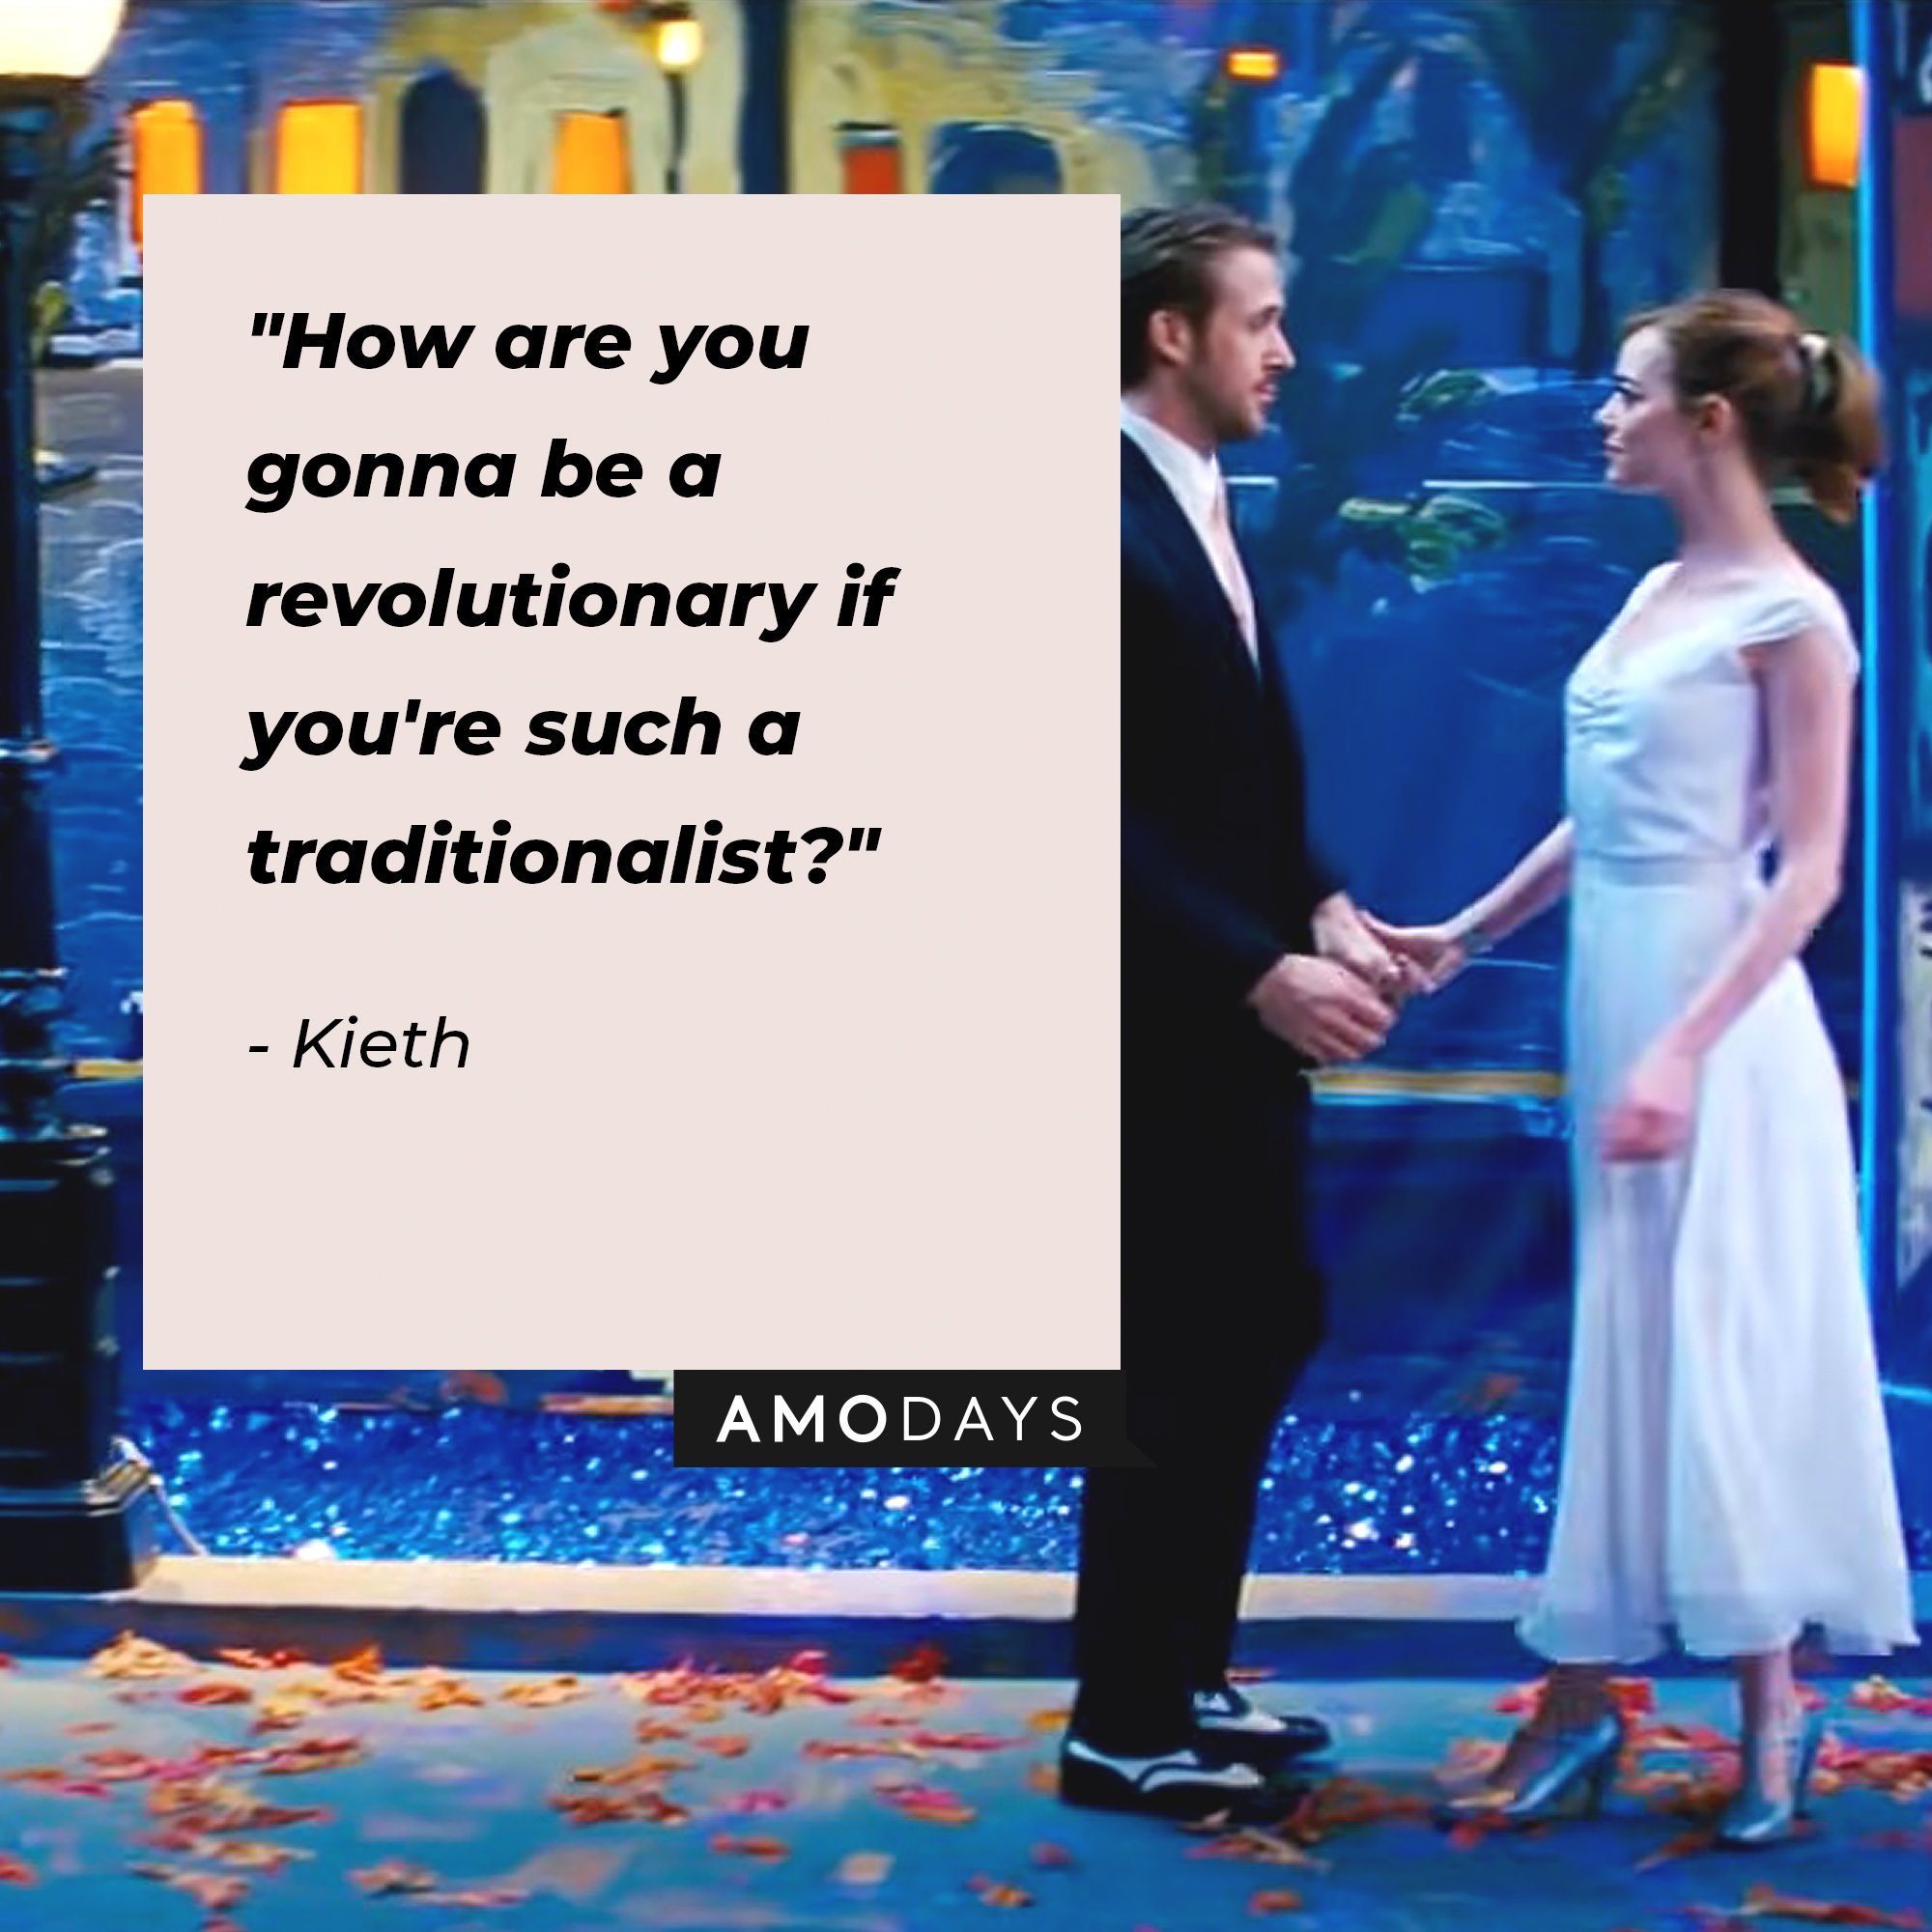 Kieth’s quote: "How are you gonna be a revolutionary if you're such a traditionalist?" | Image: AmoDays